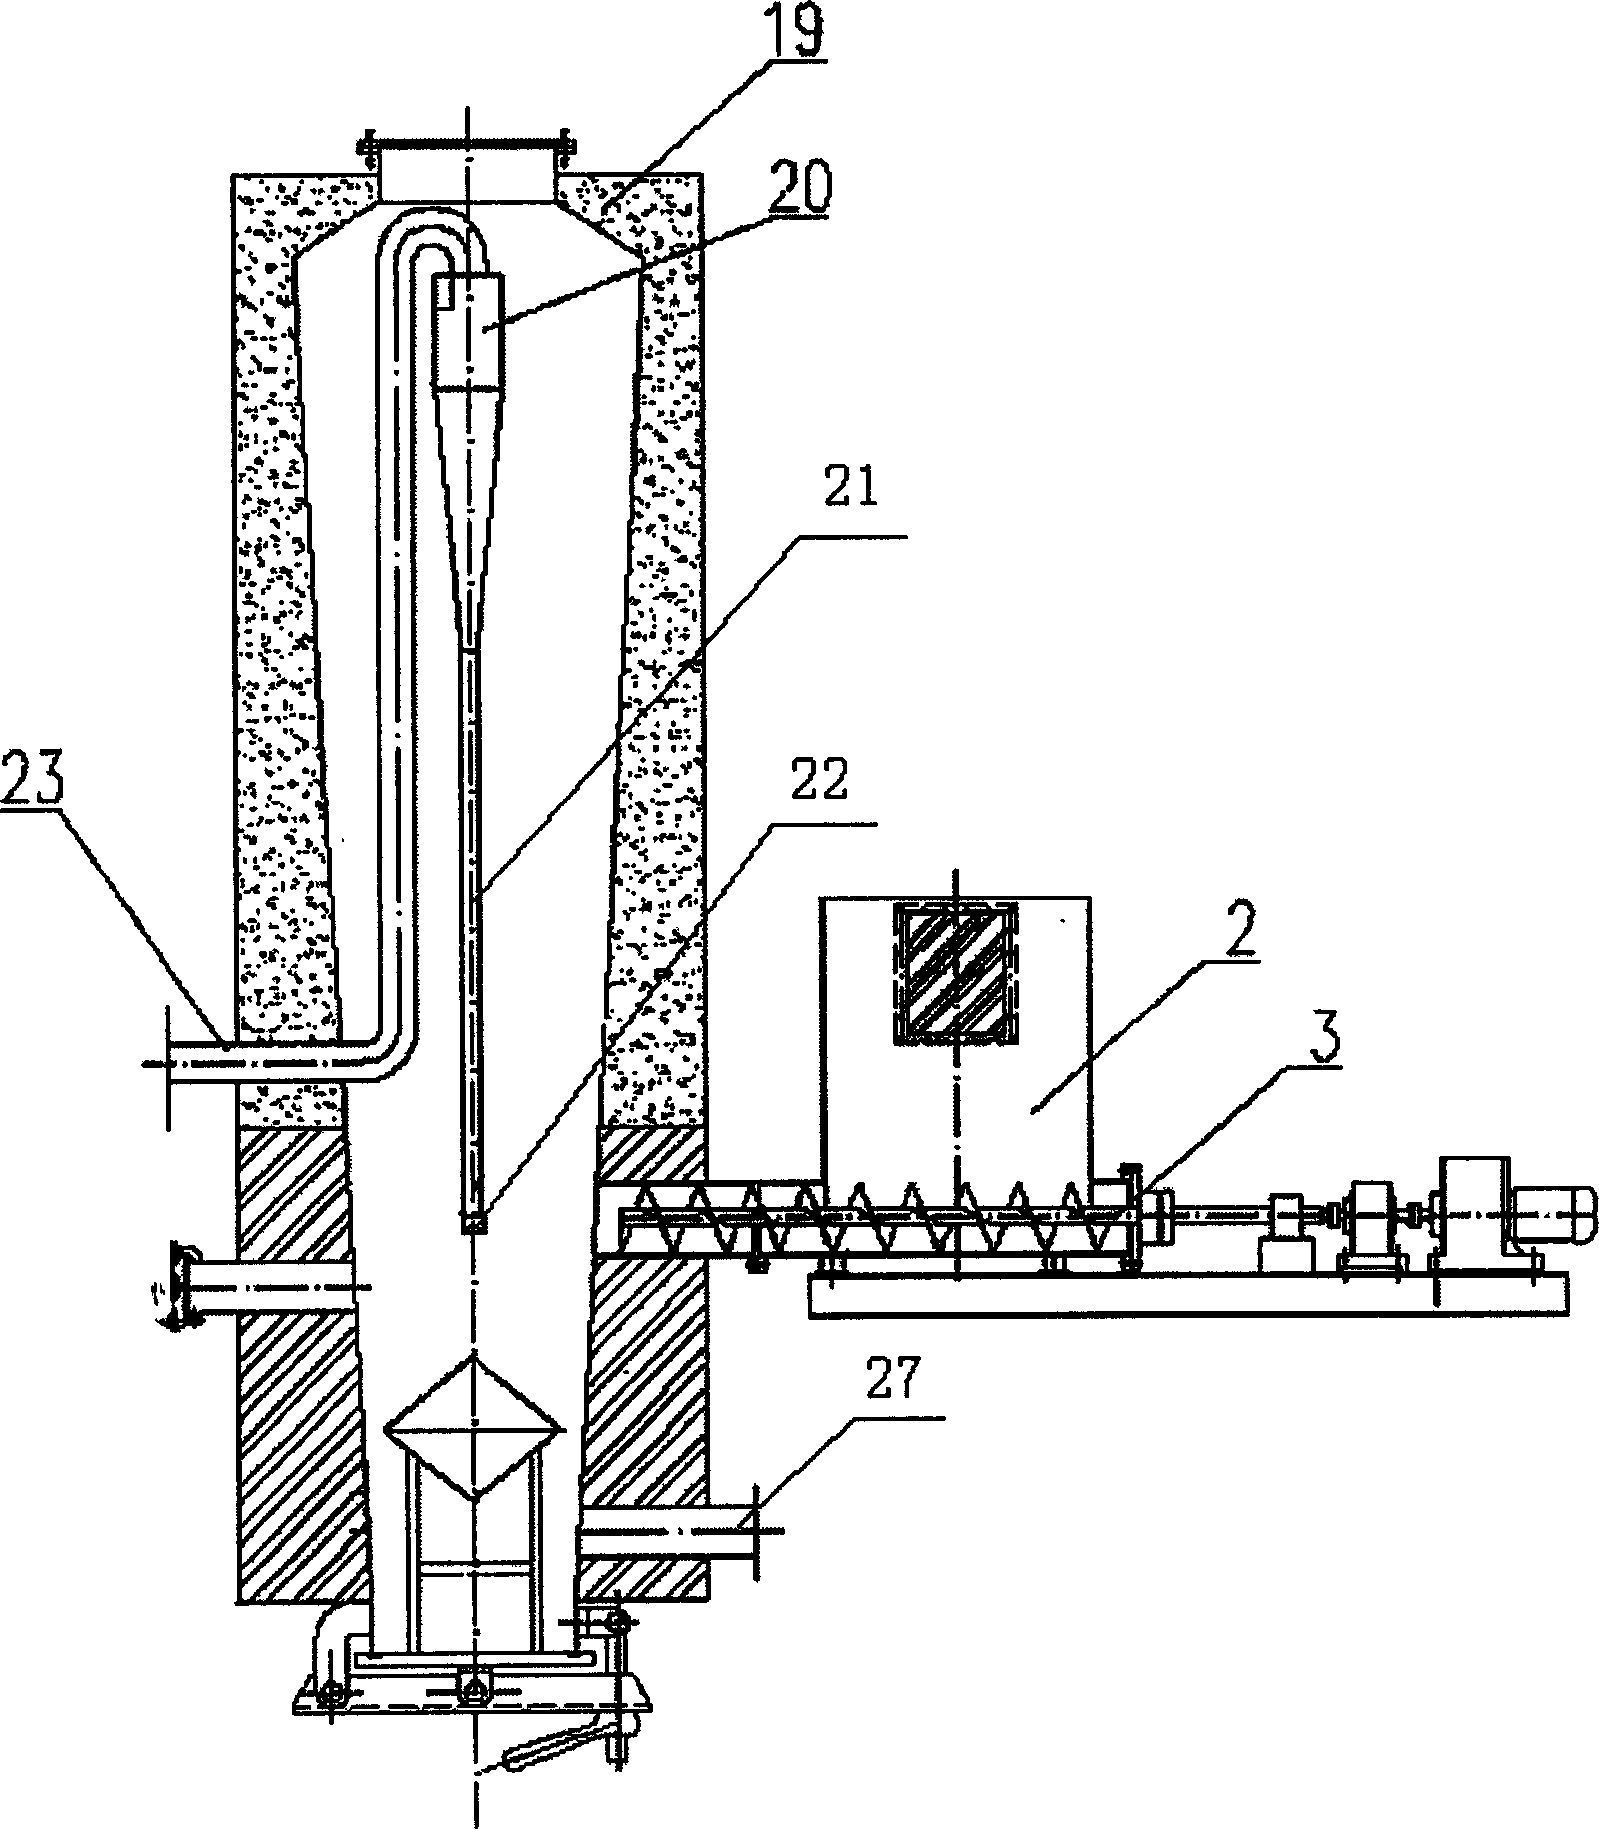 Process and apparatus for preparing coal gas by using bulky biomass materials